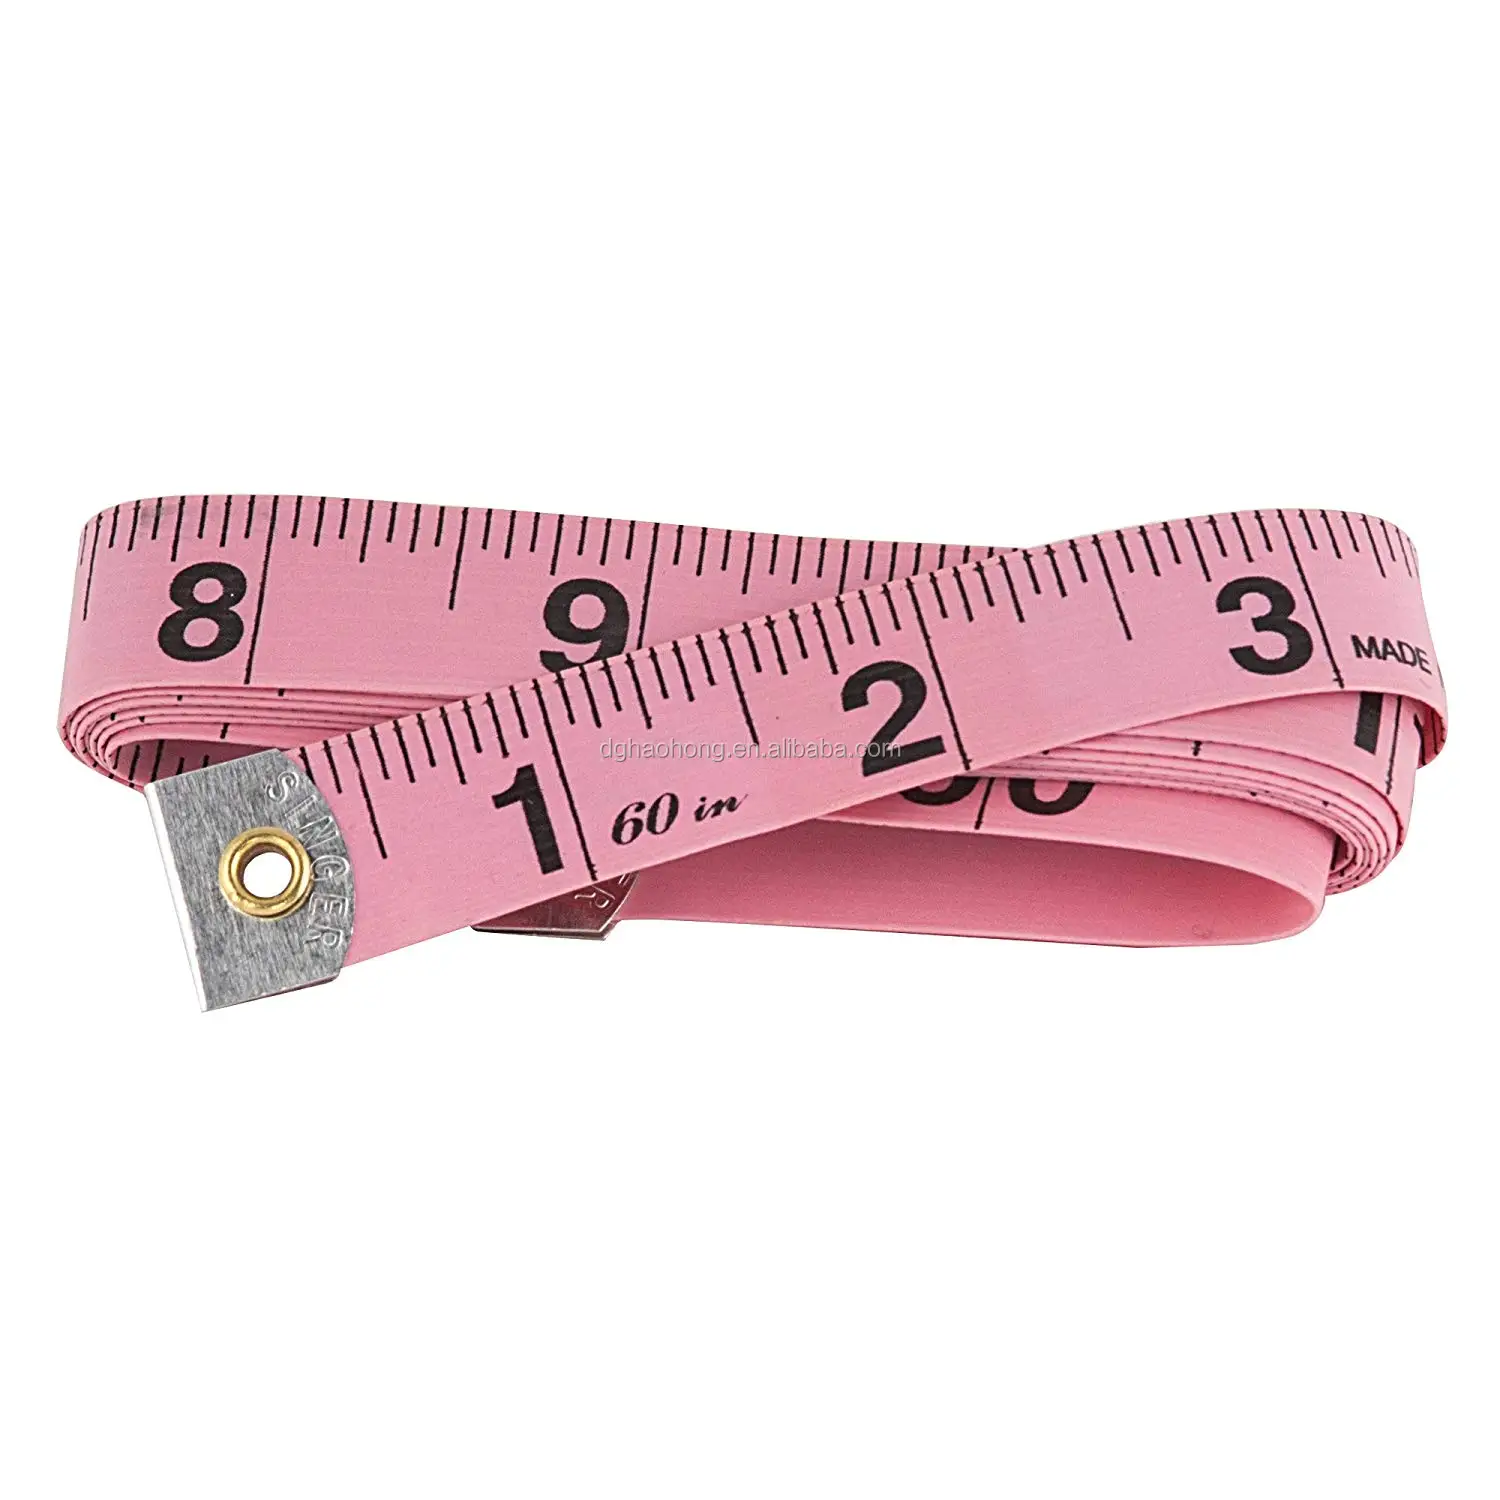 measuring tape made of cloth